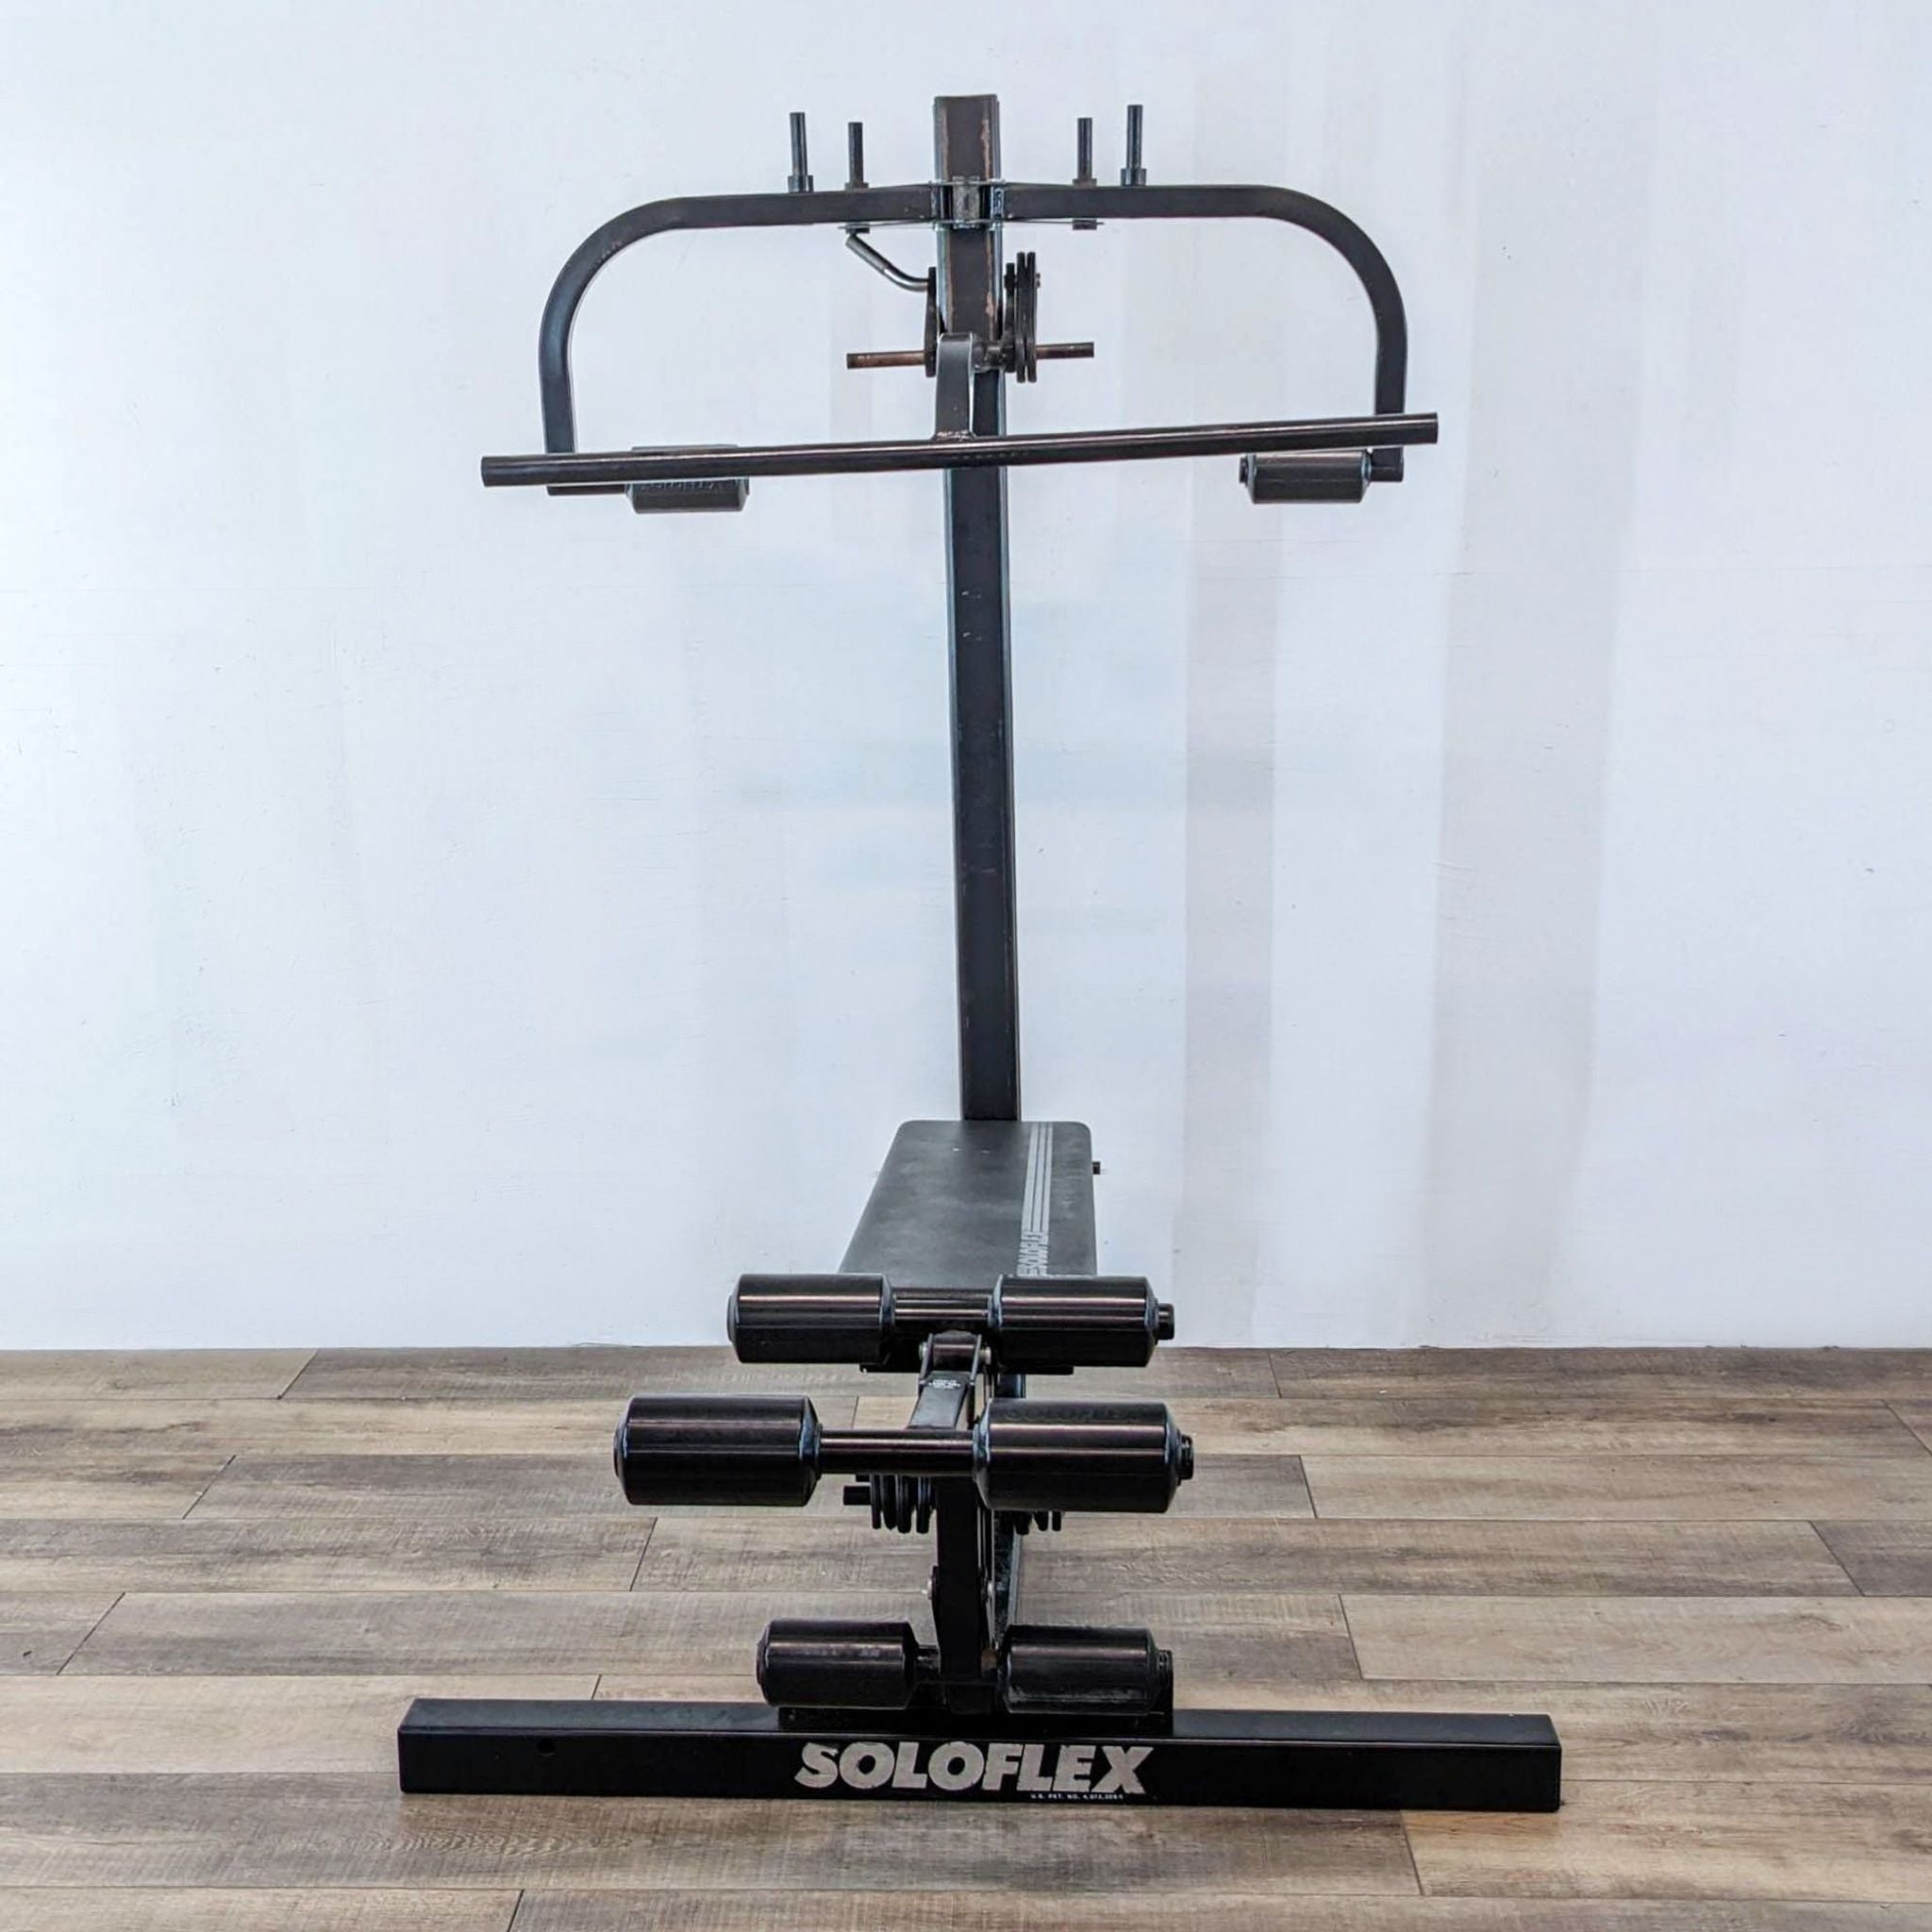 Alt text 1: A Soloflex weightlifting machine with a black bench and resistance bar arms against a white wall.